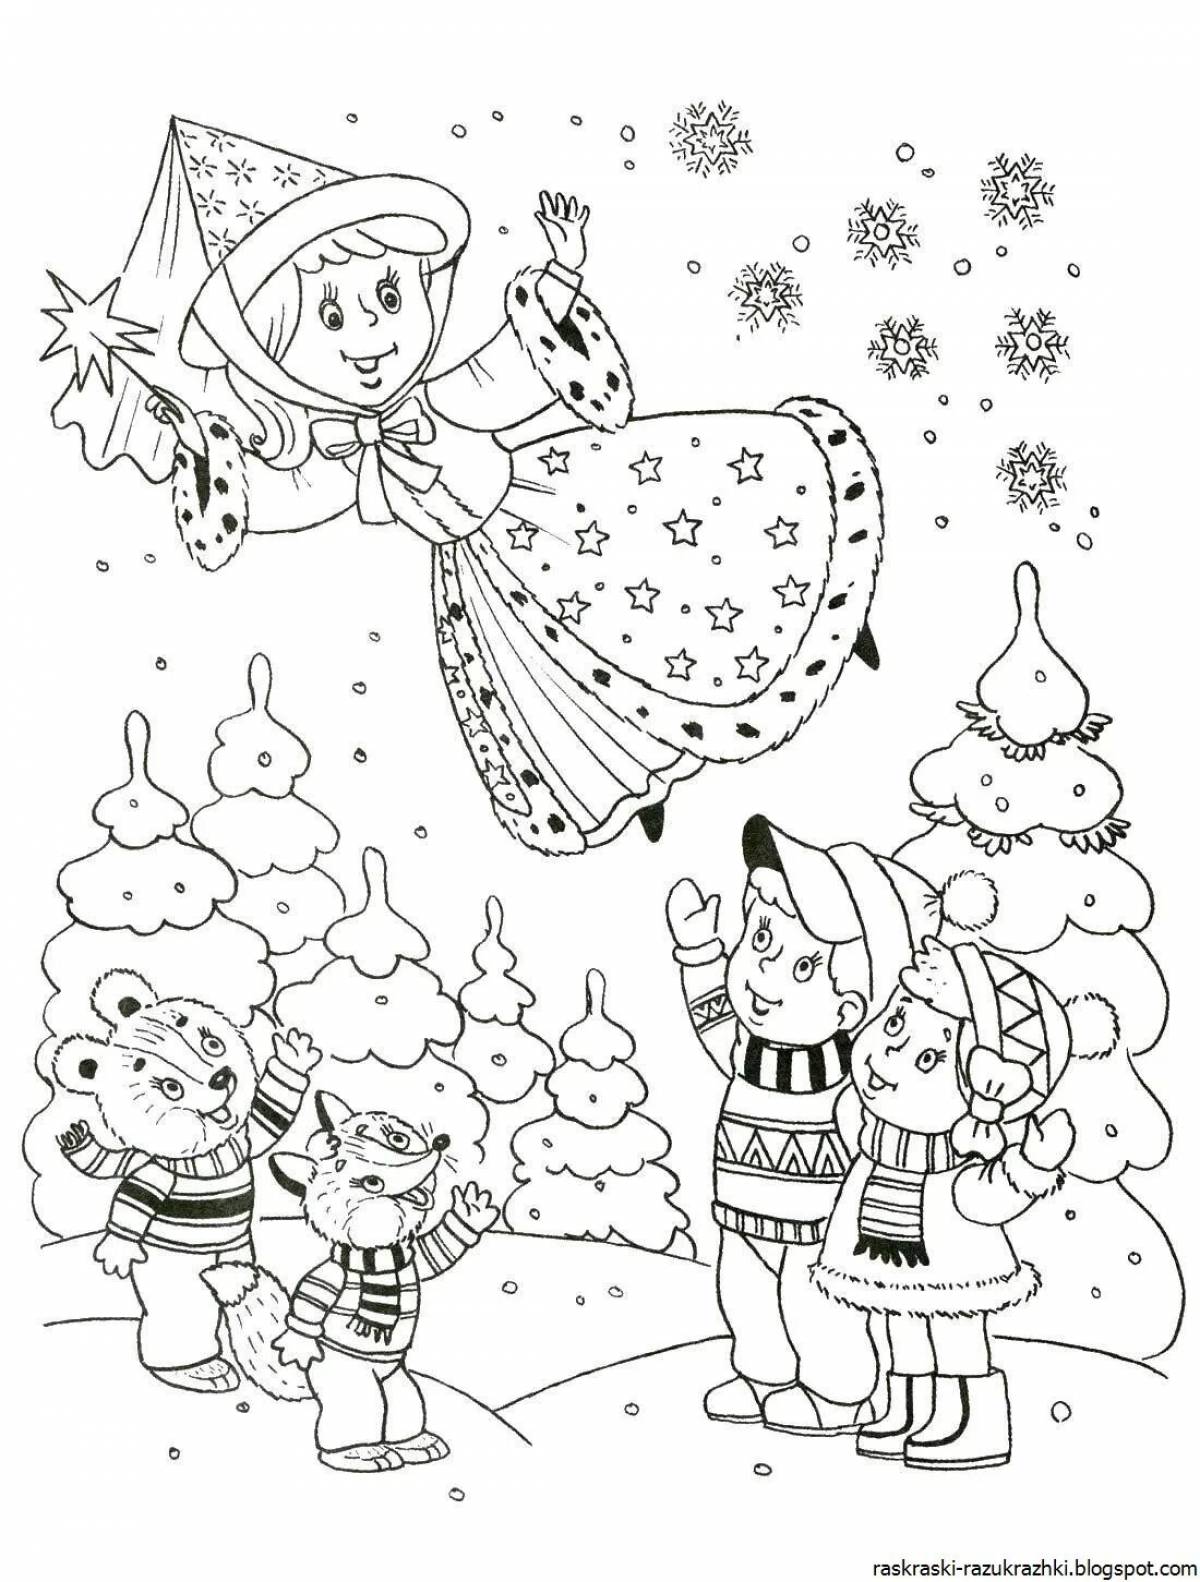 Cool winter coloring book for kids